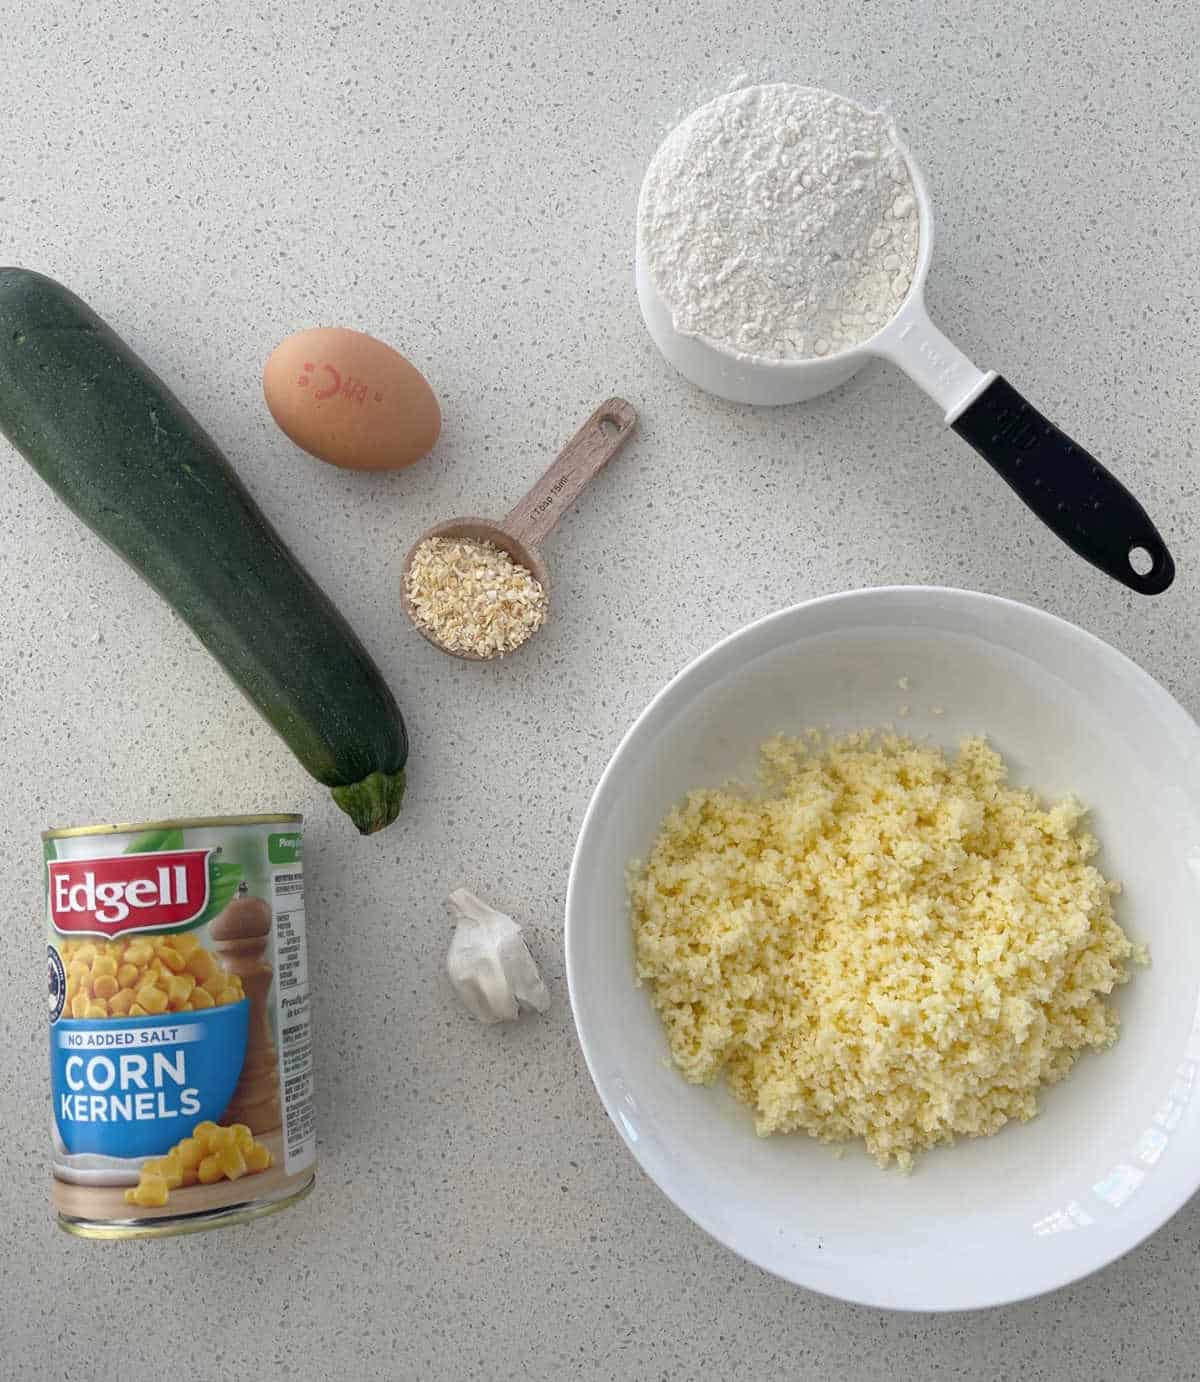 ingredients to make corn and zucchini fritters on a speckled bench.